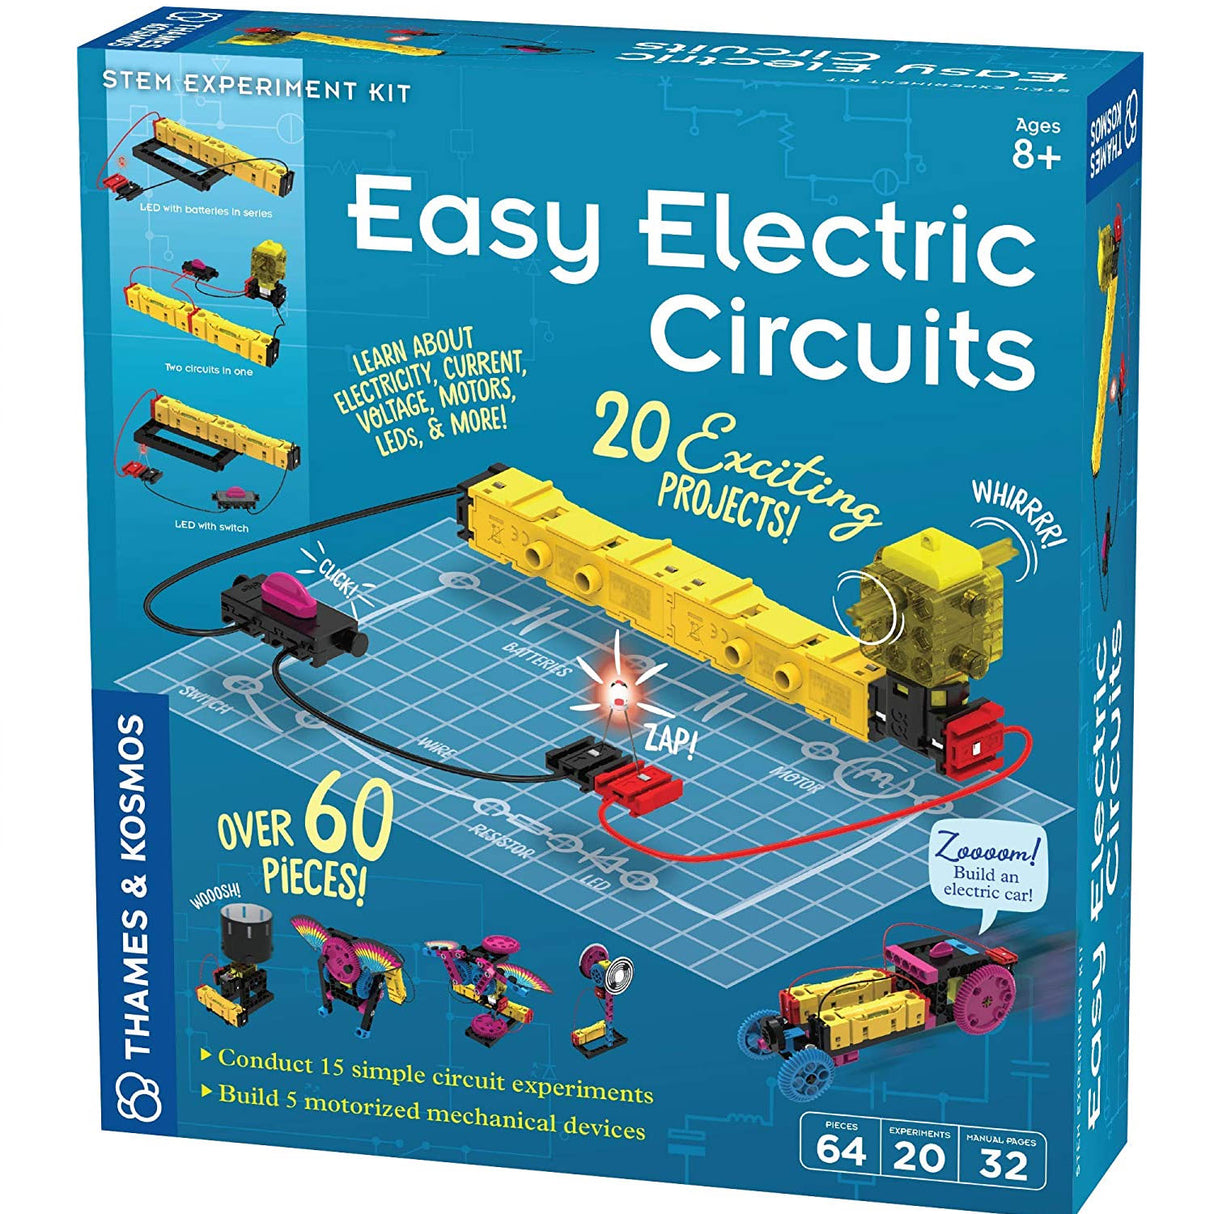 Easy Electric Circuits